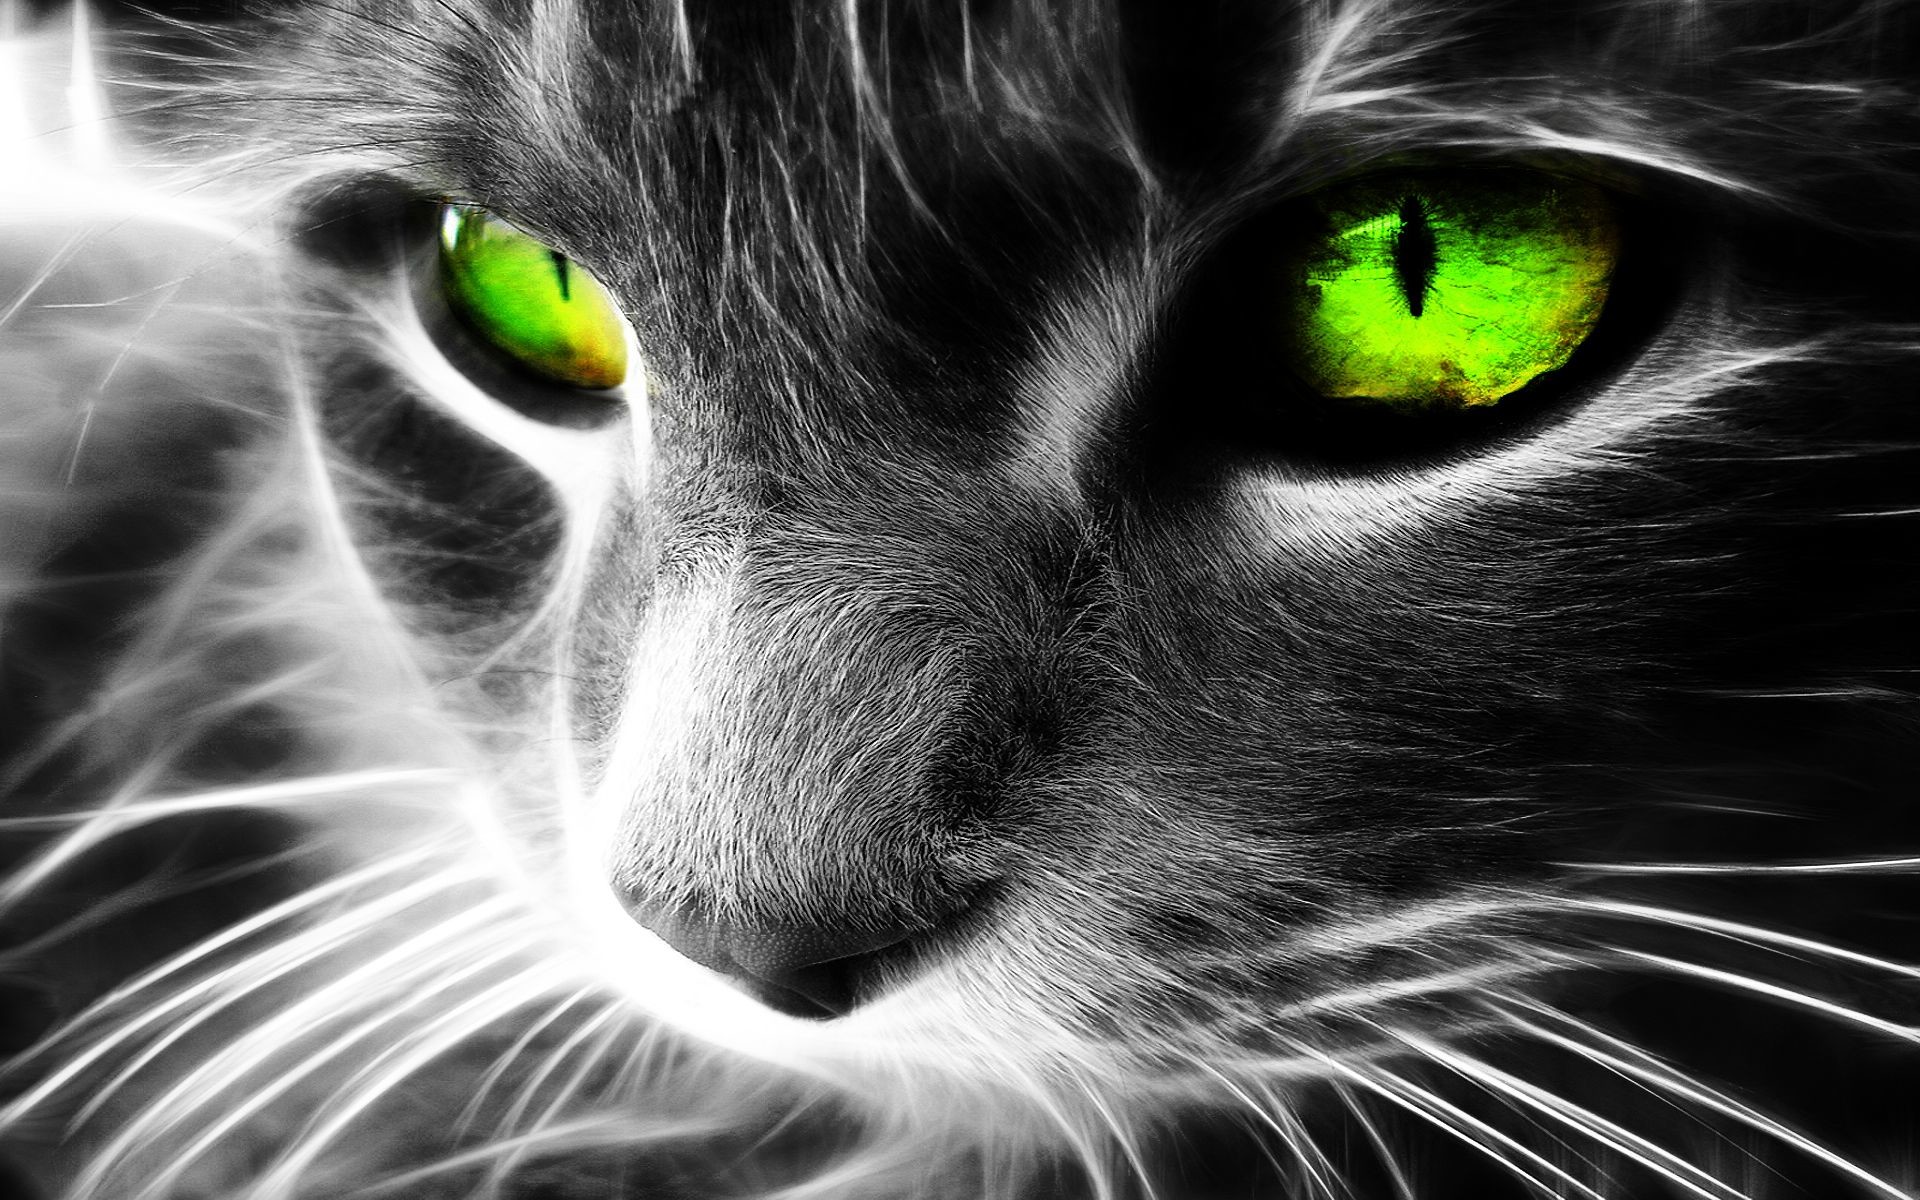 Desktop This HD wallpaper green cat in animal wallpapers was added to gallery on August This image have eight hundred and twenty views and eight likes